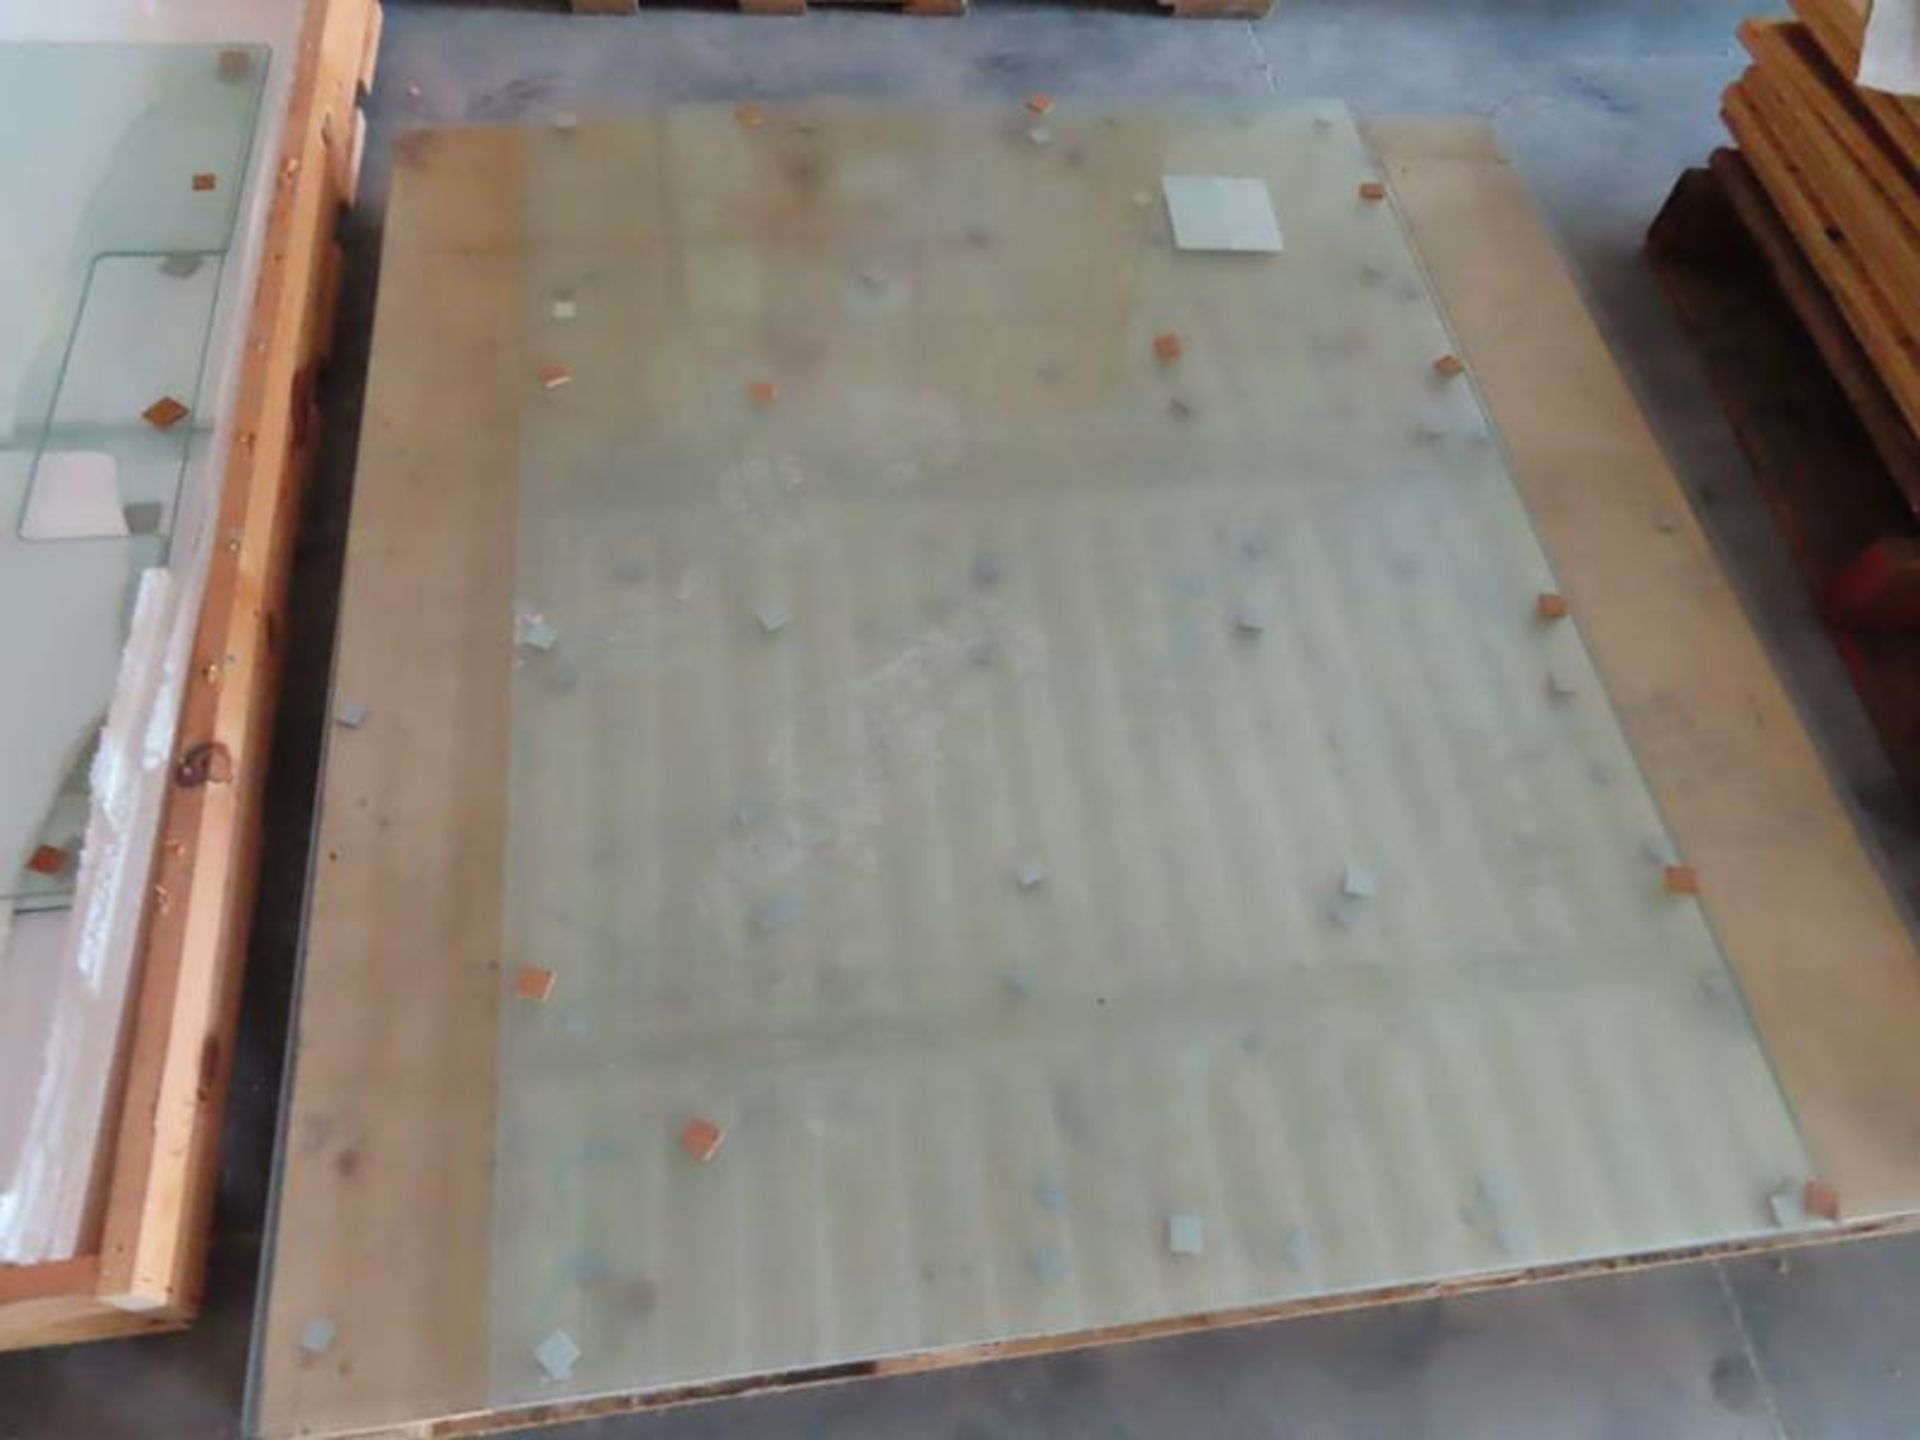 2 PALLETS WITH TEMPERED GLASS PANELS 3FTX4FT - Image 2 of 2